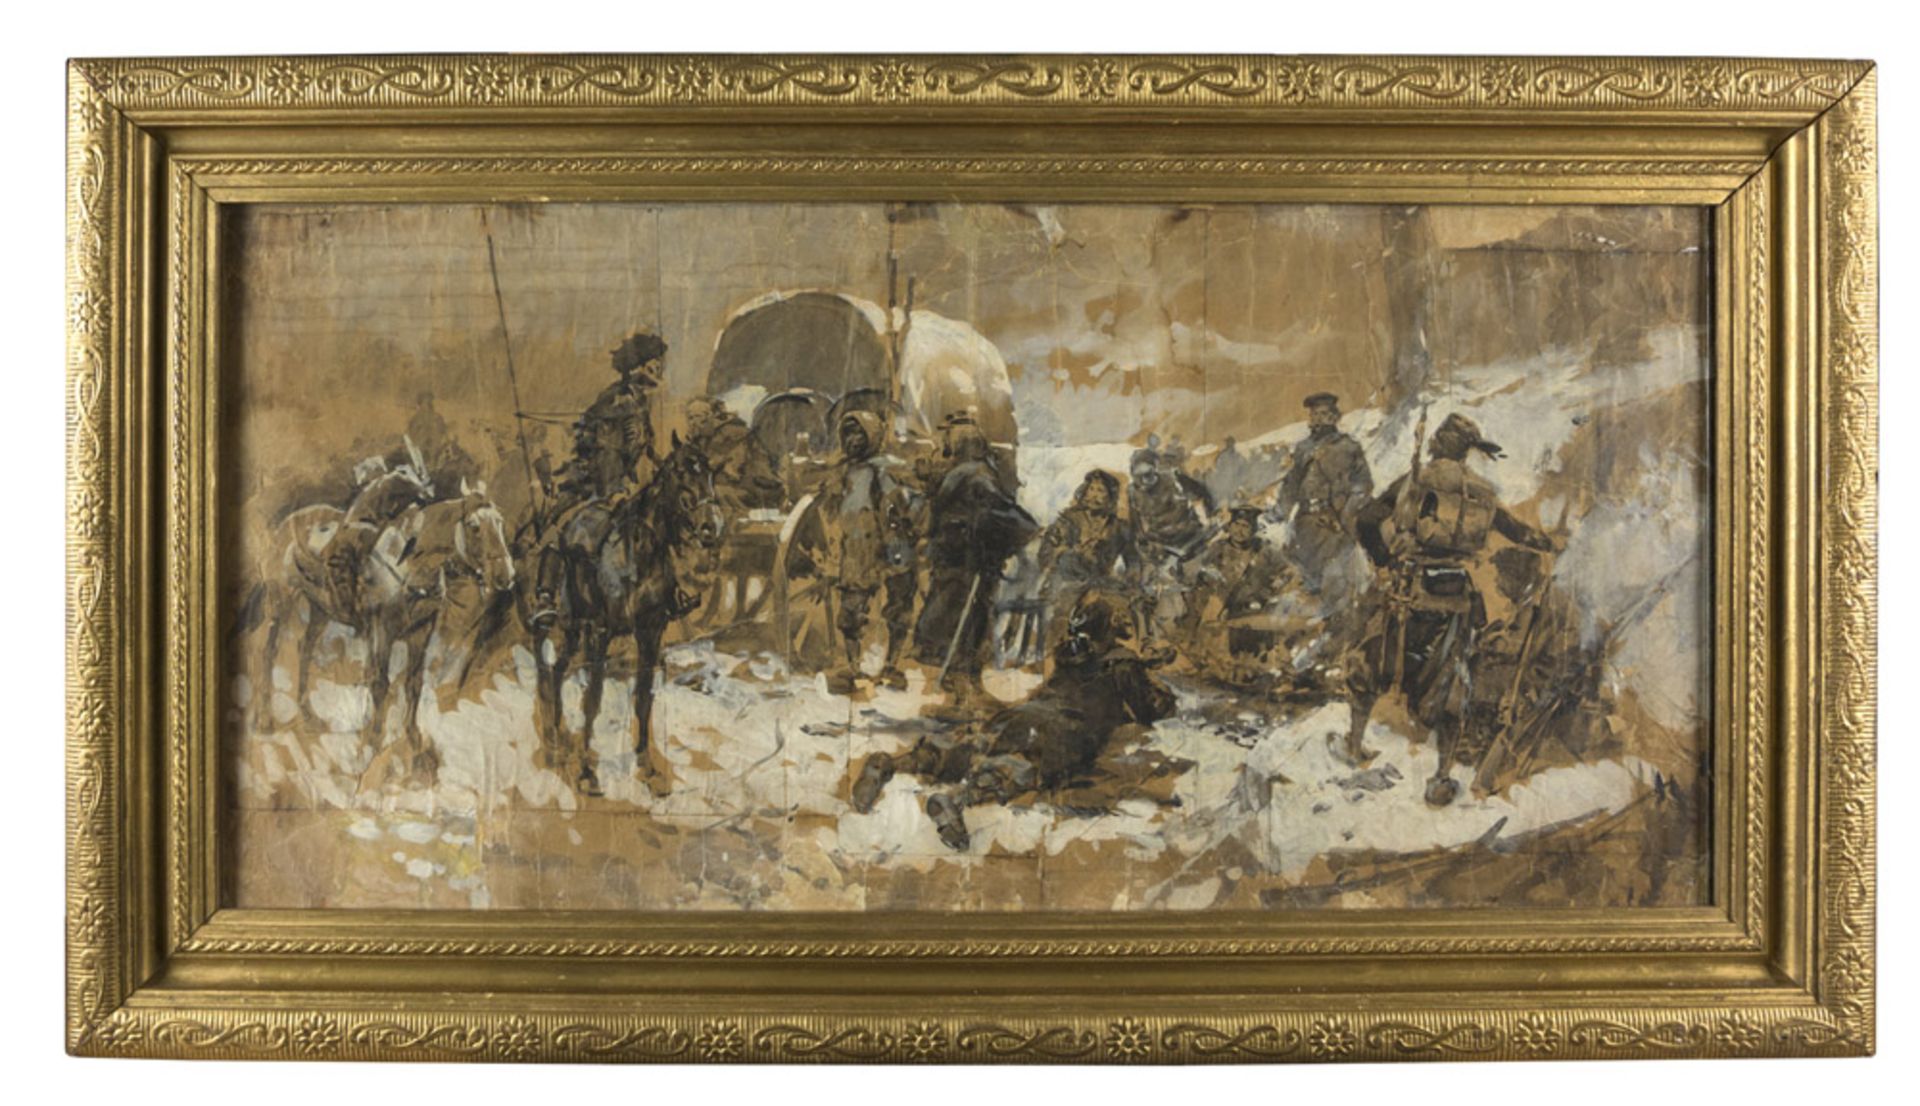 FRENCH PAINTER, 19TH CENTURY SOLDIERS' CAMP IN THE SNOW Water-color and white lead on paper